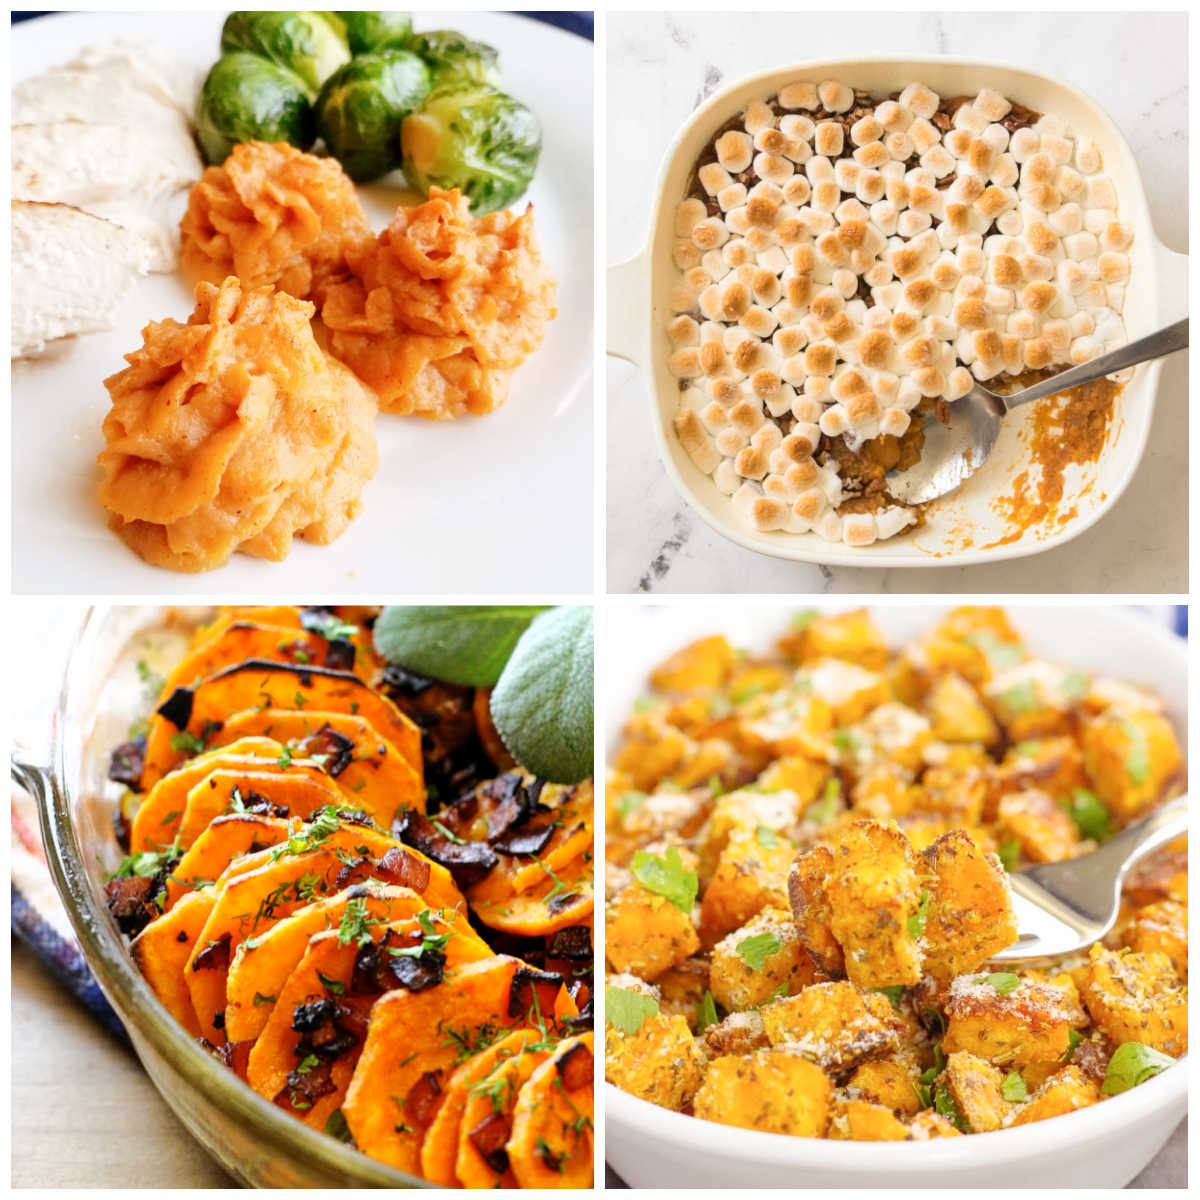 Collage of sweet potato images including a casserole, duchess sweet potatoes, scalloped sweet potatoes and roasted sweet potatoes.